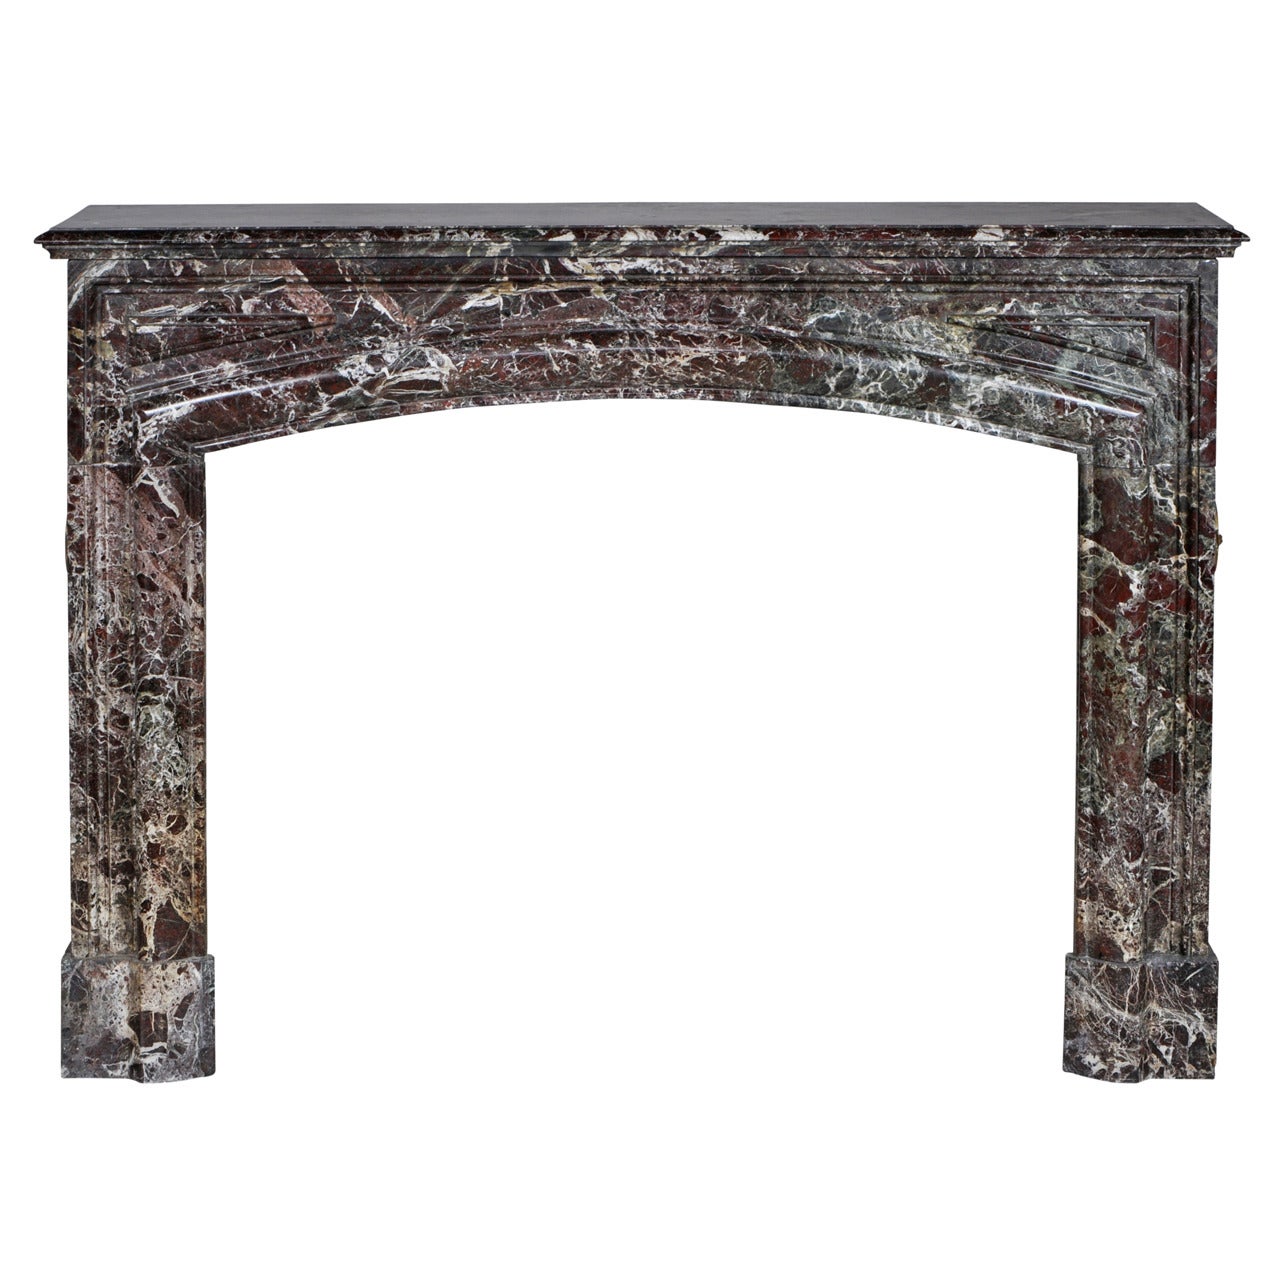 Antique Louis XIV Style Bollection Fireplace Sculpted in Red Levanto Marble